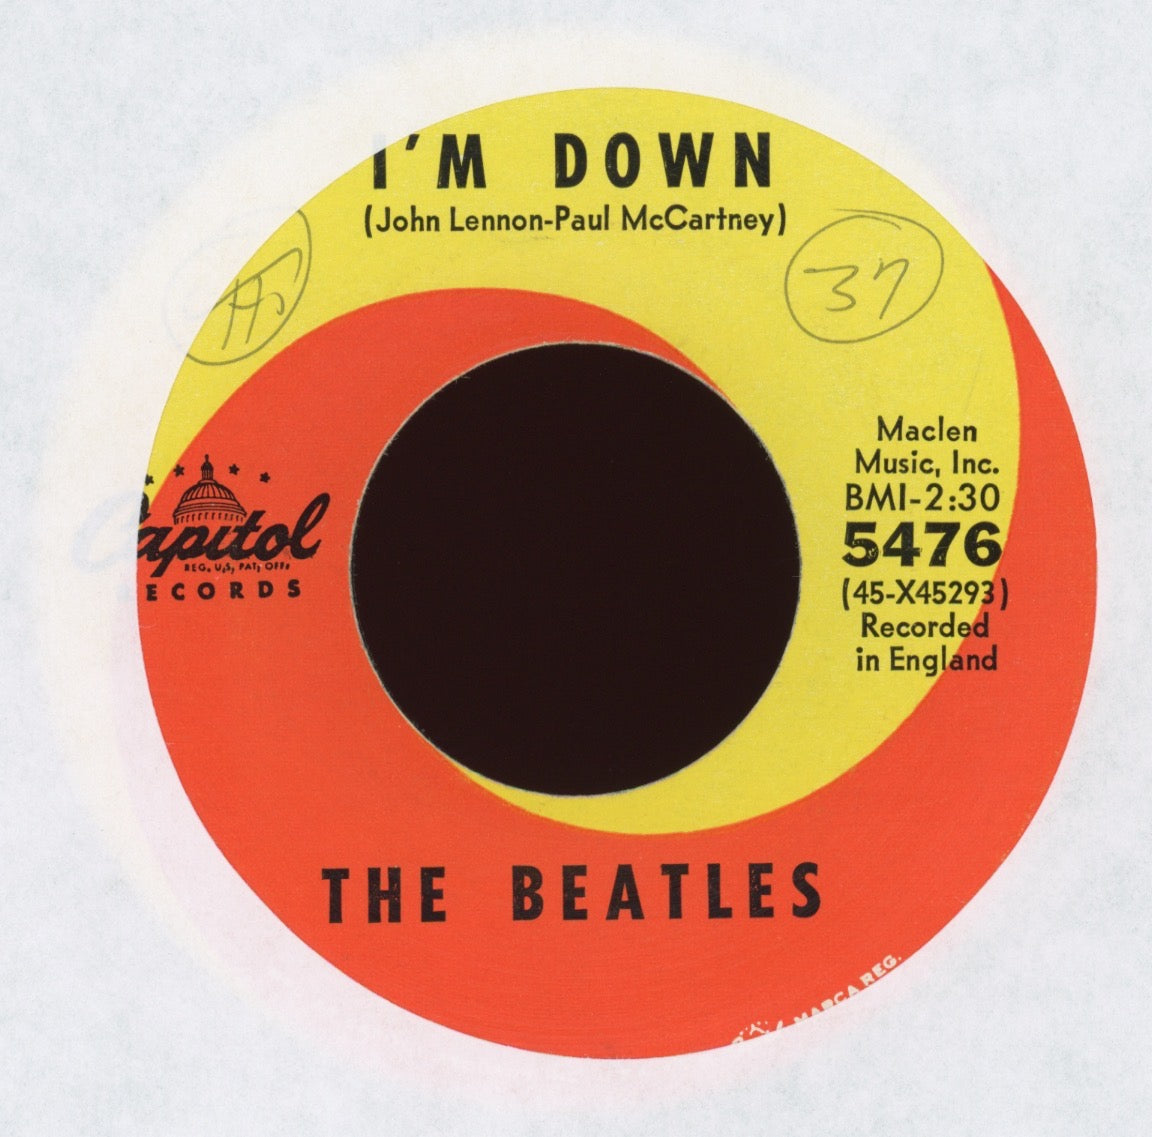 The Beatles - Help! / I’m Down on Capitol 45 With Picture Sleeve